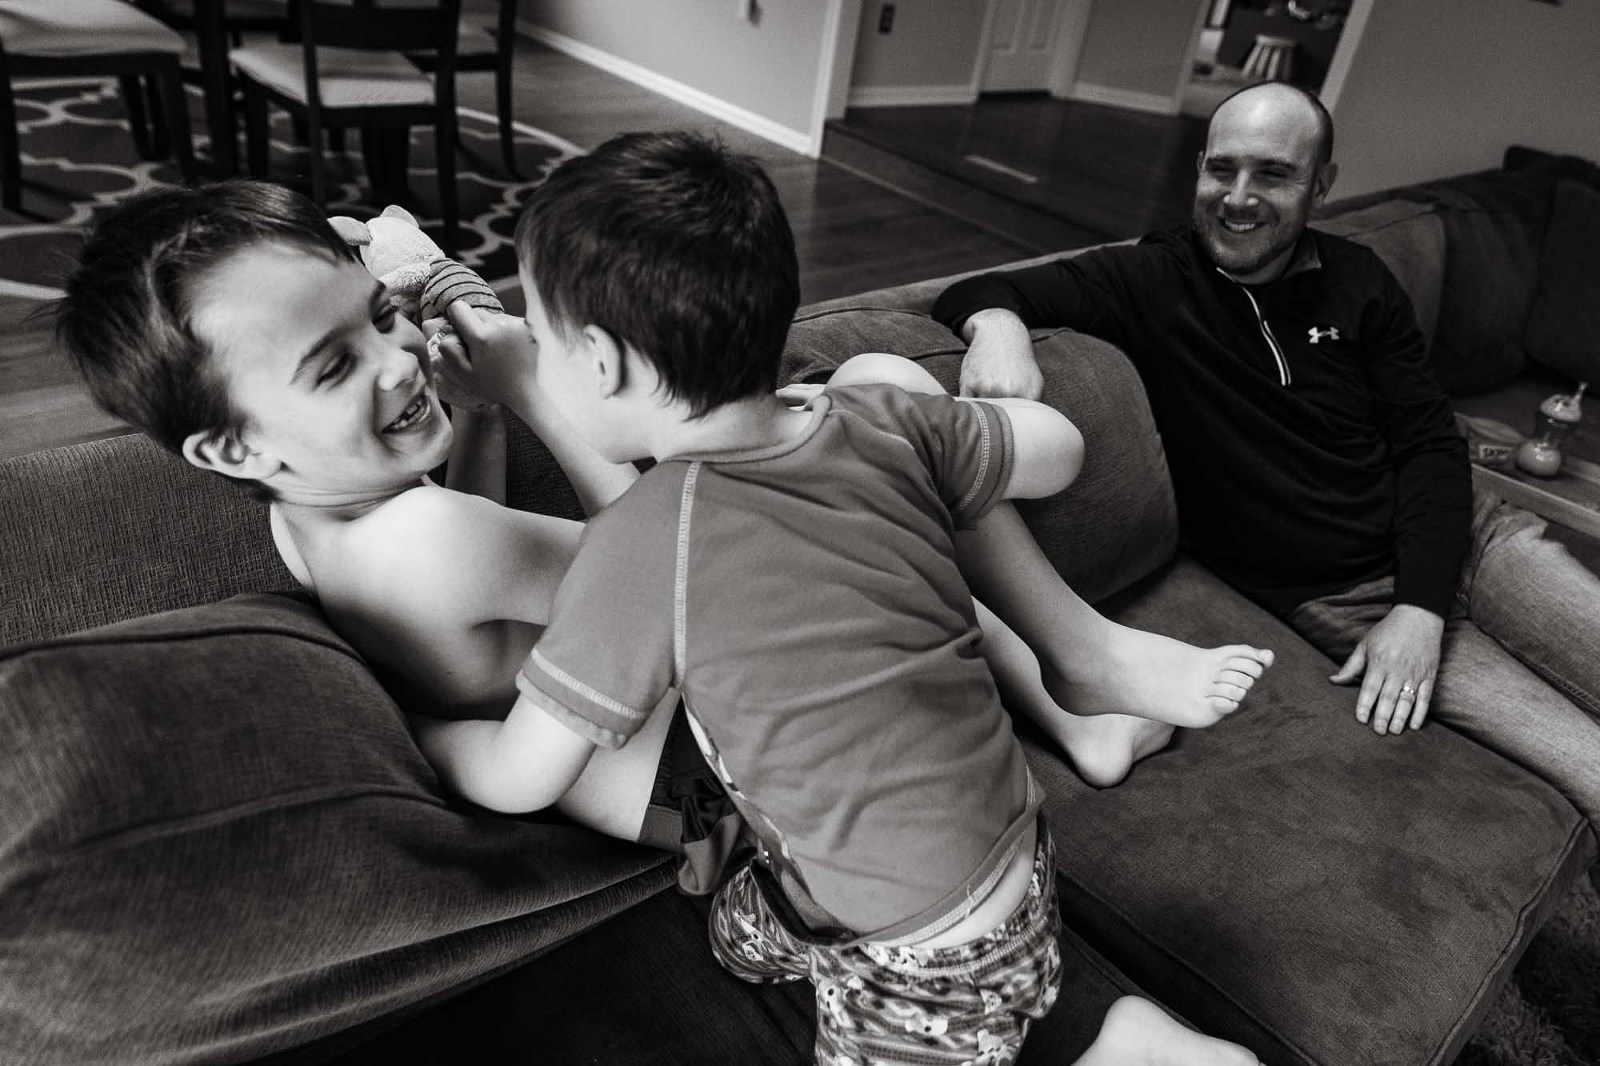 black and white photo of boys wrestling on the sofa with dad laughing in the background